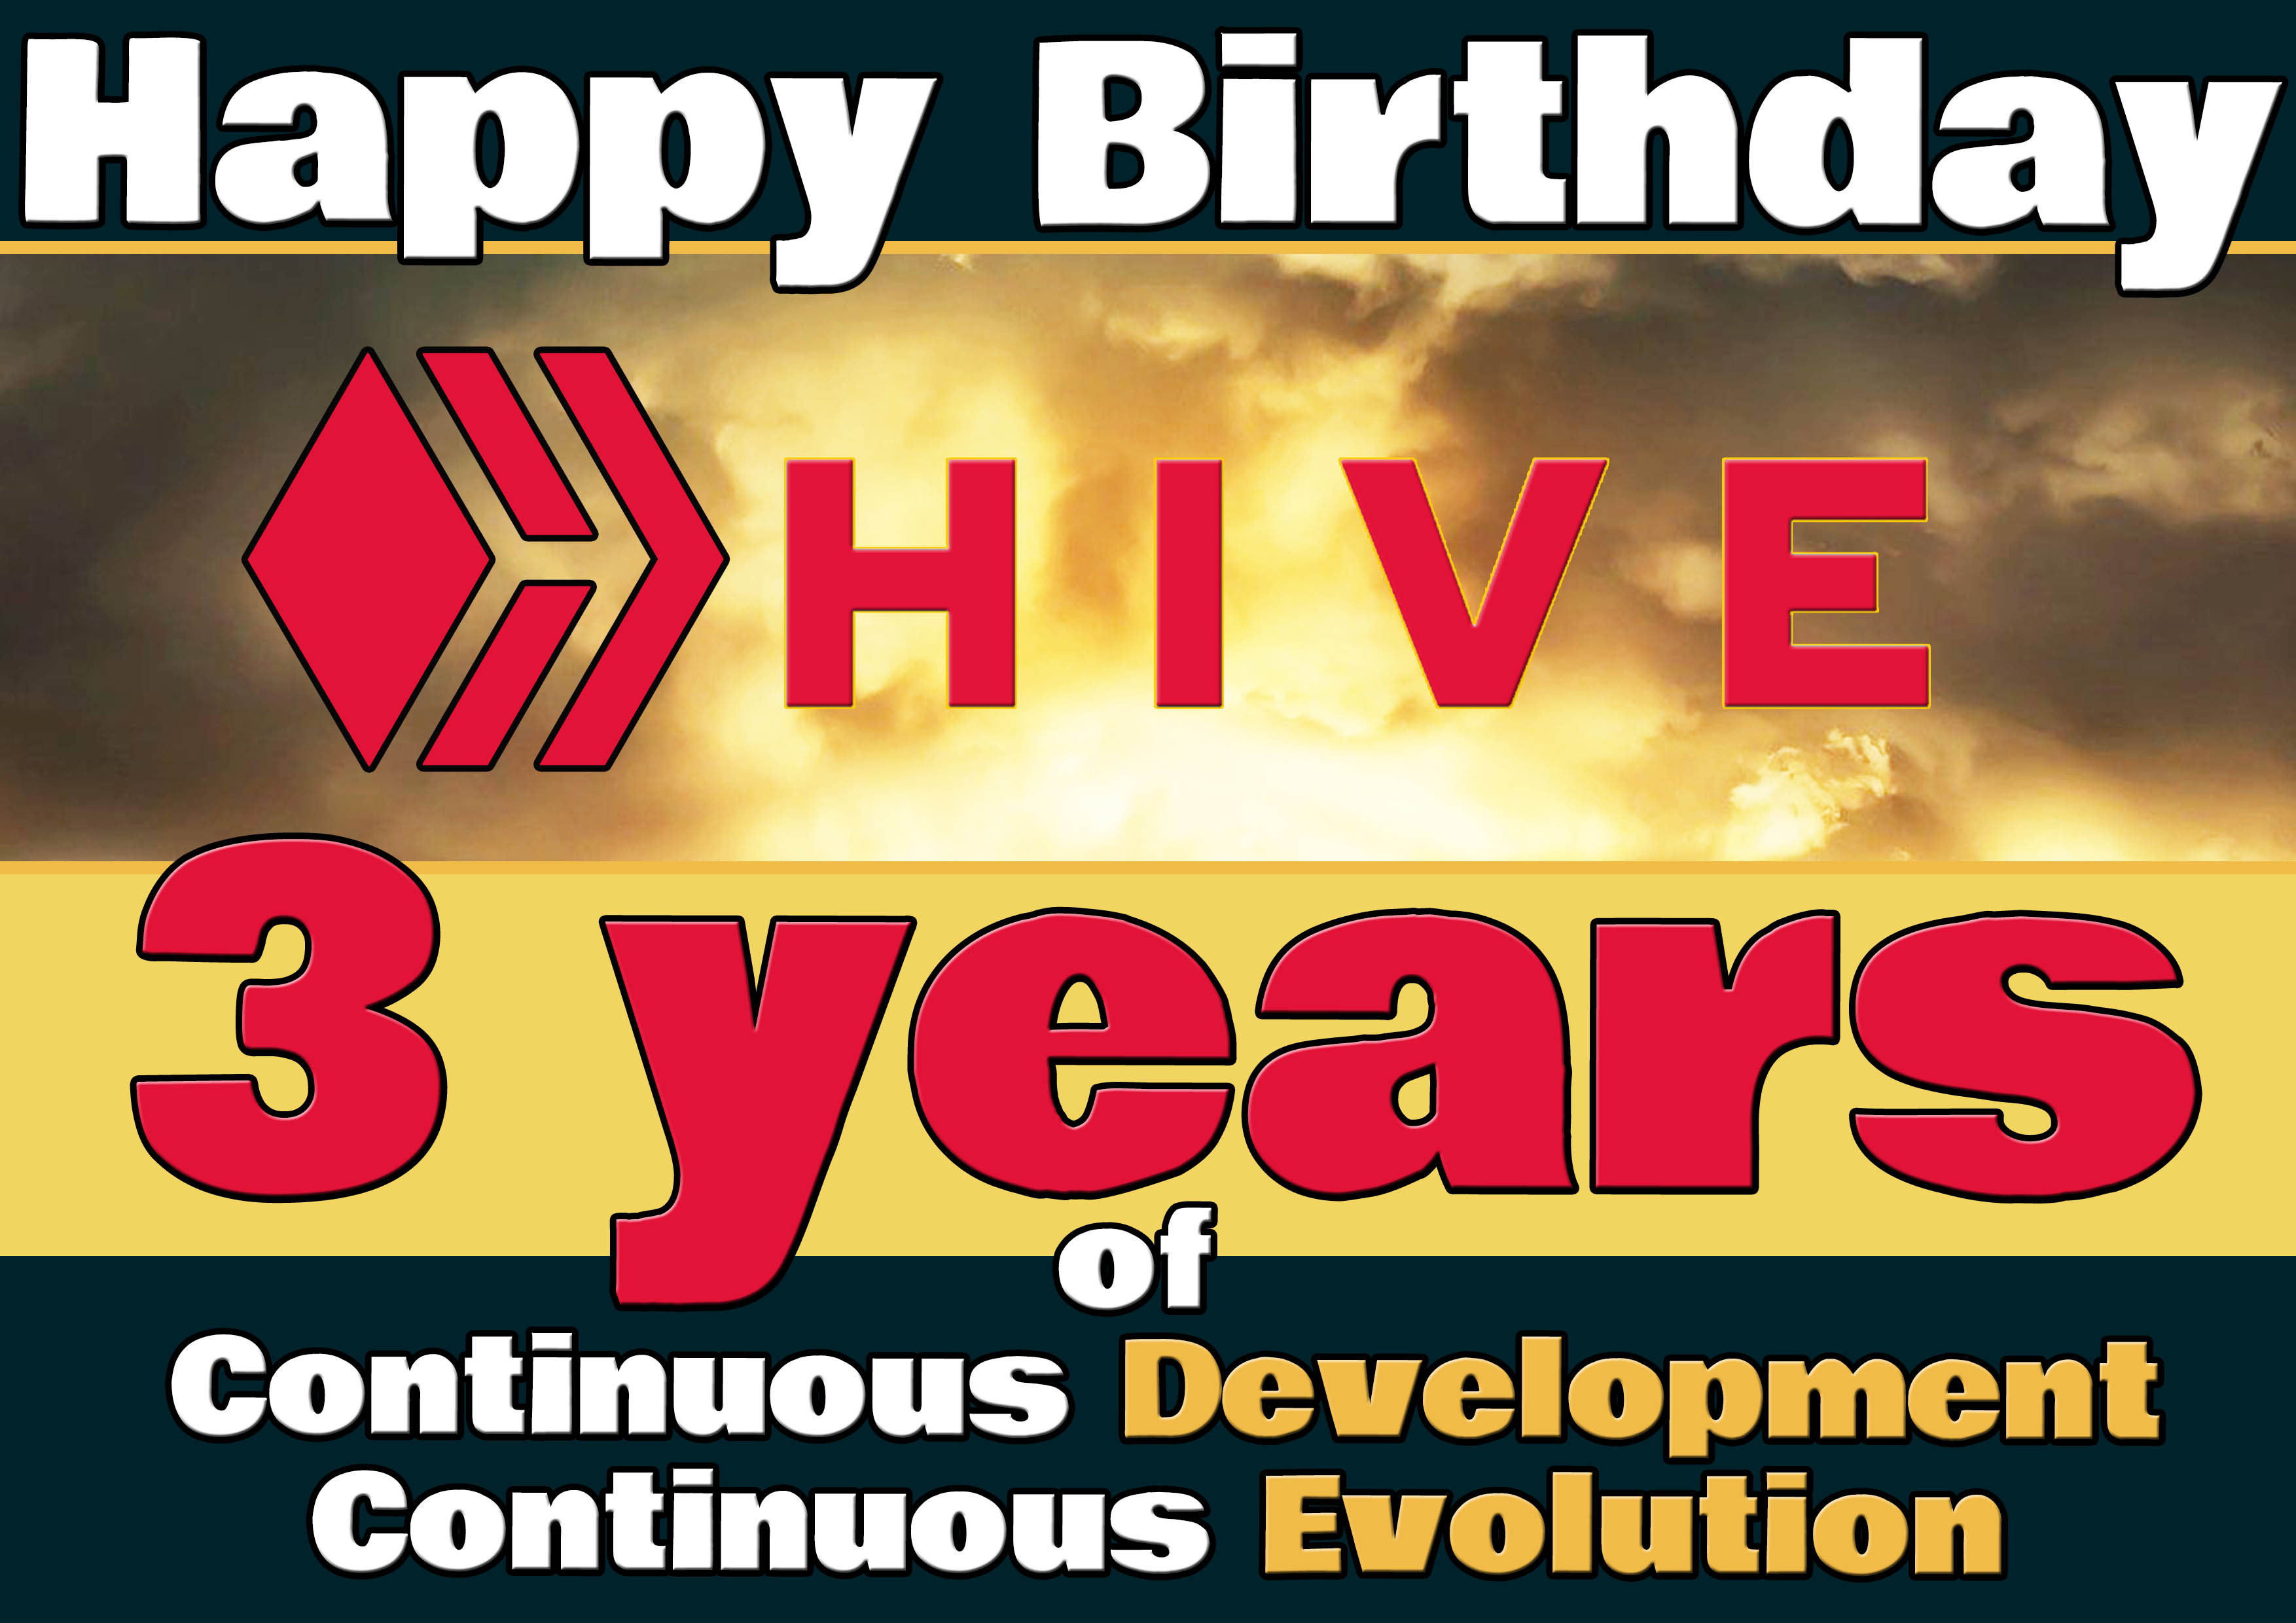 @libertycrypto27/happy-birthday-hive-3-years-of-continuous-development-and-continuous-evolution-started-by-responding-to-a-hostile-takeover